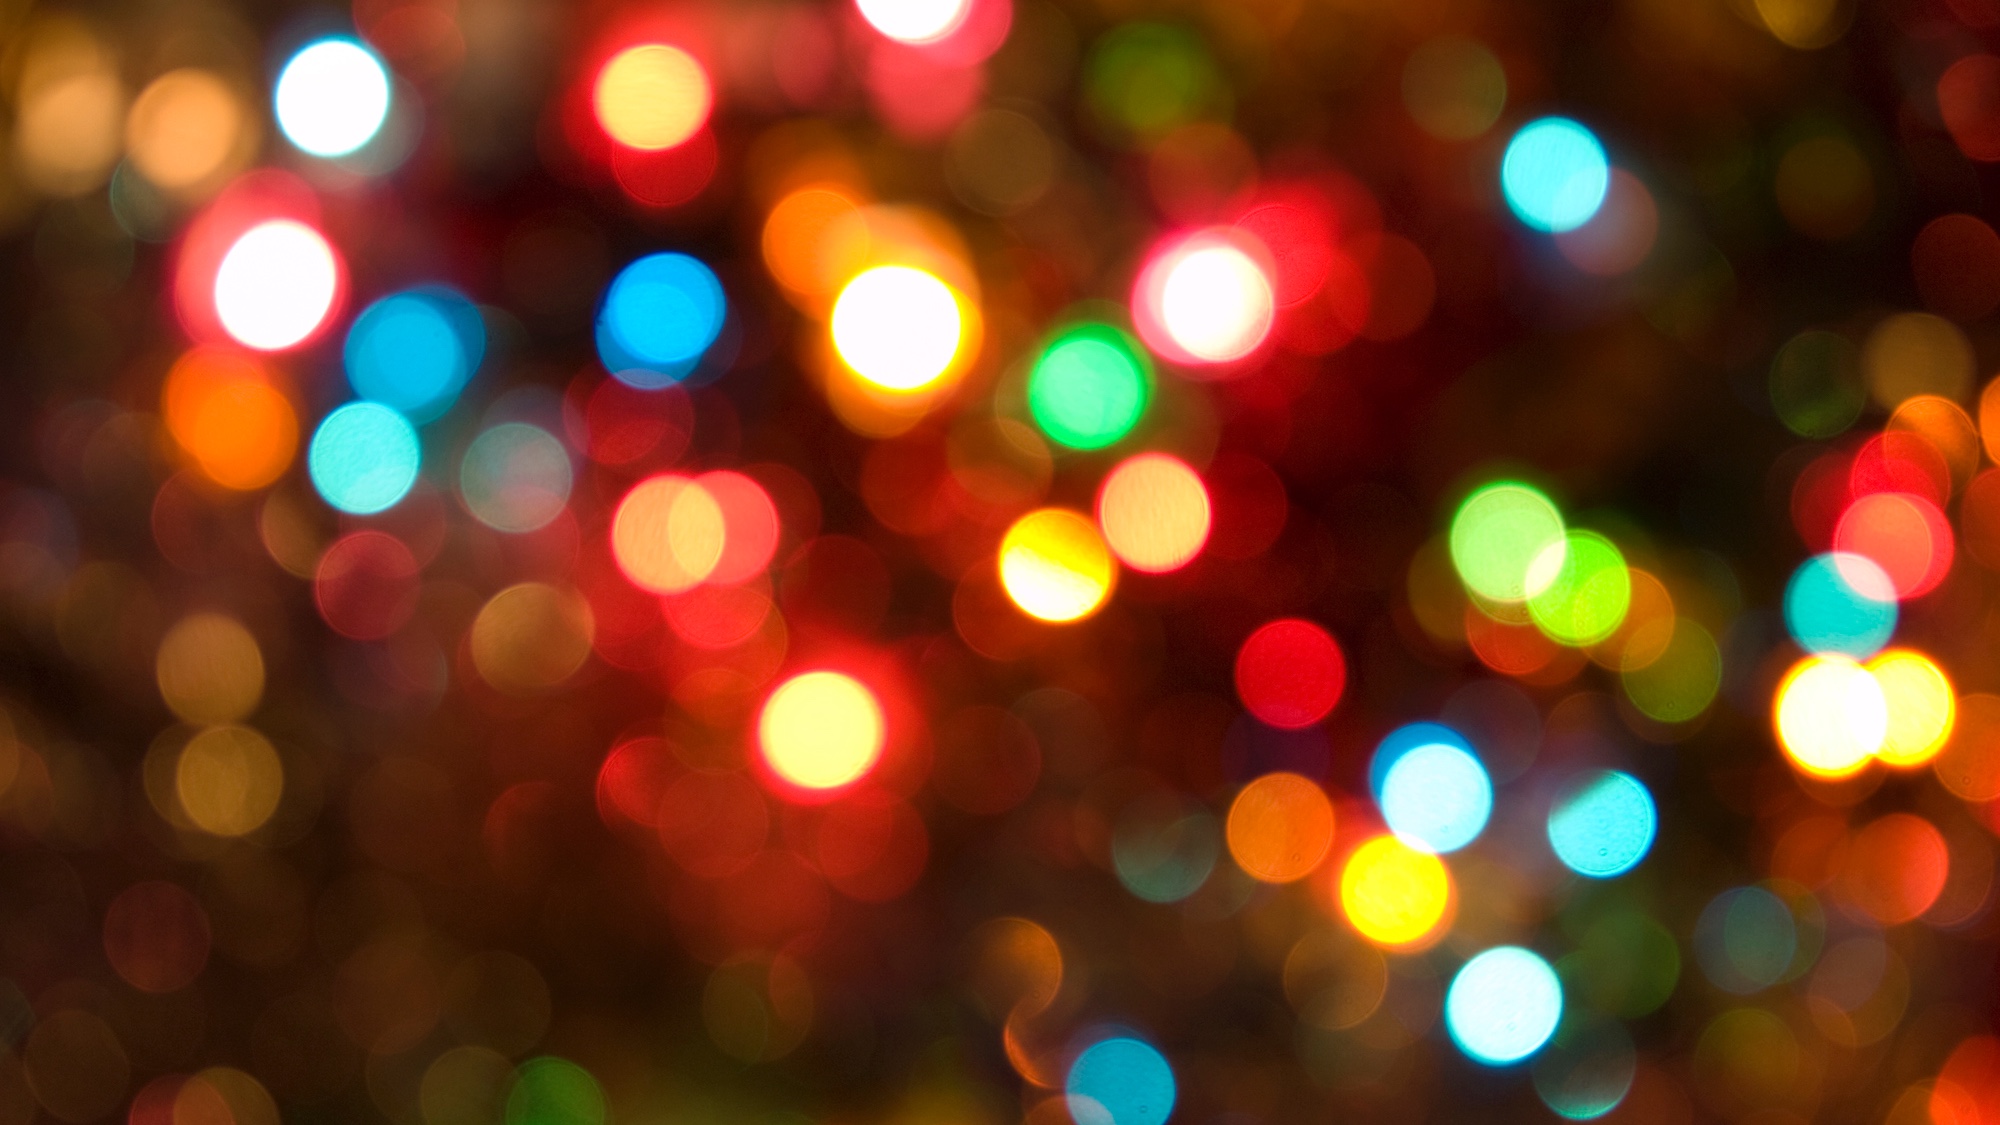 Multi-coloured holiday lights on a dark background.